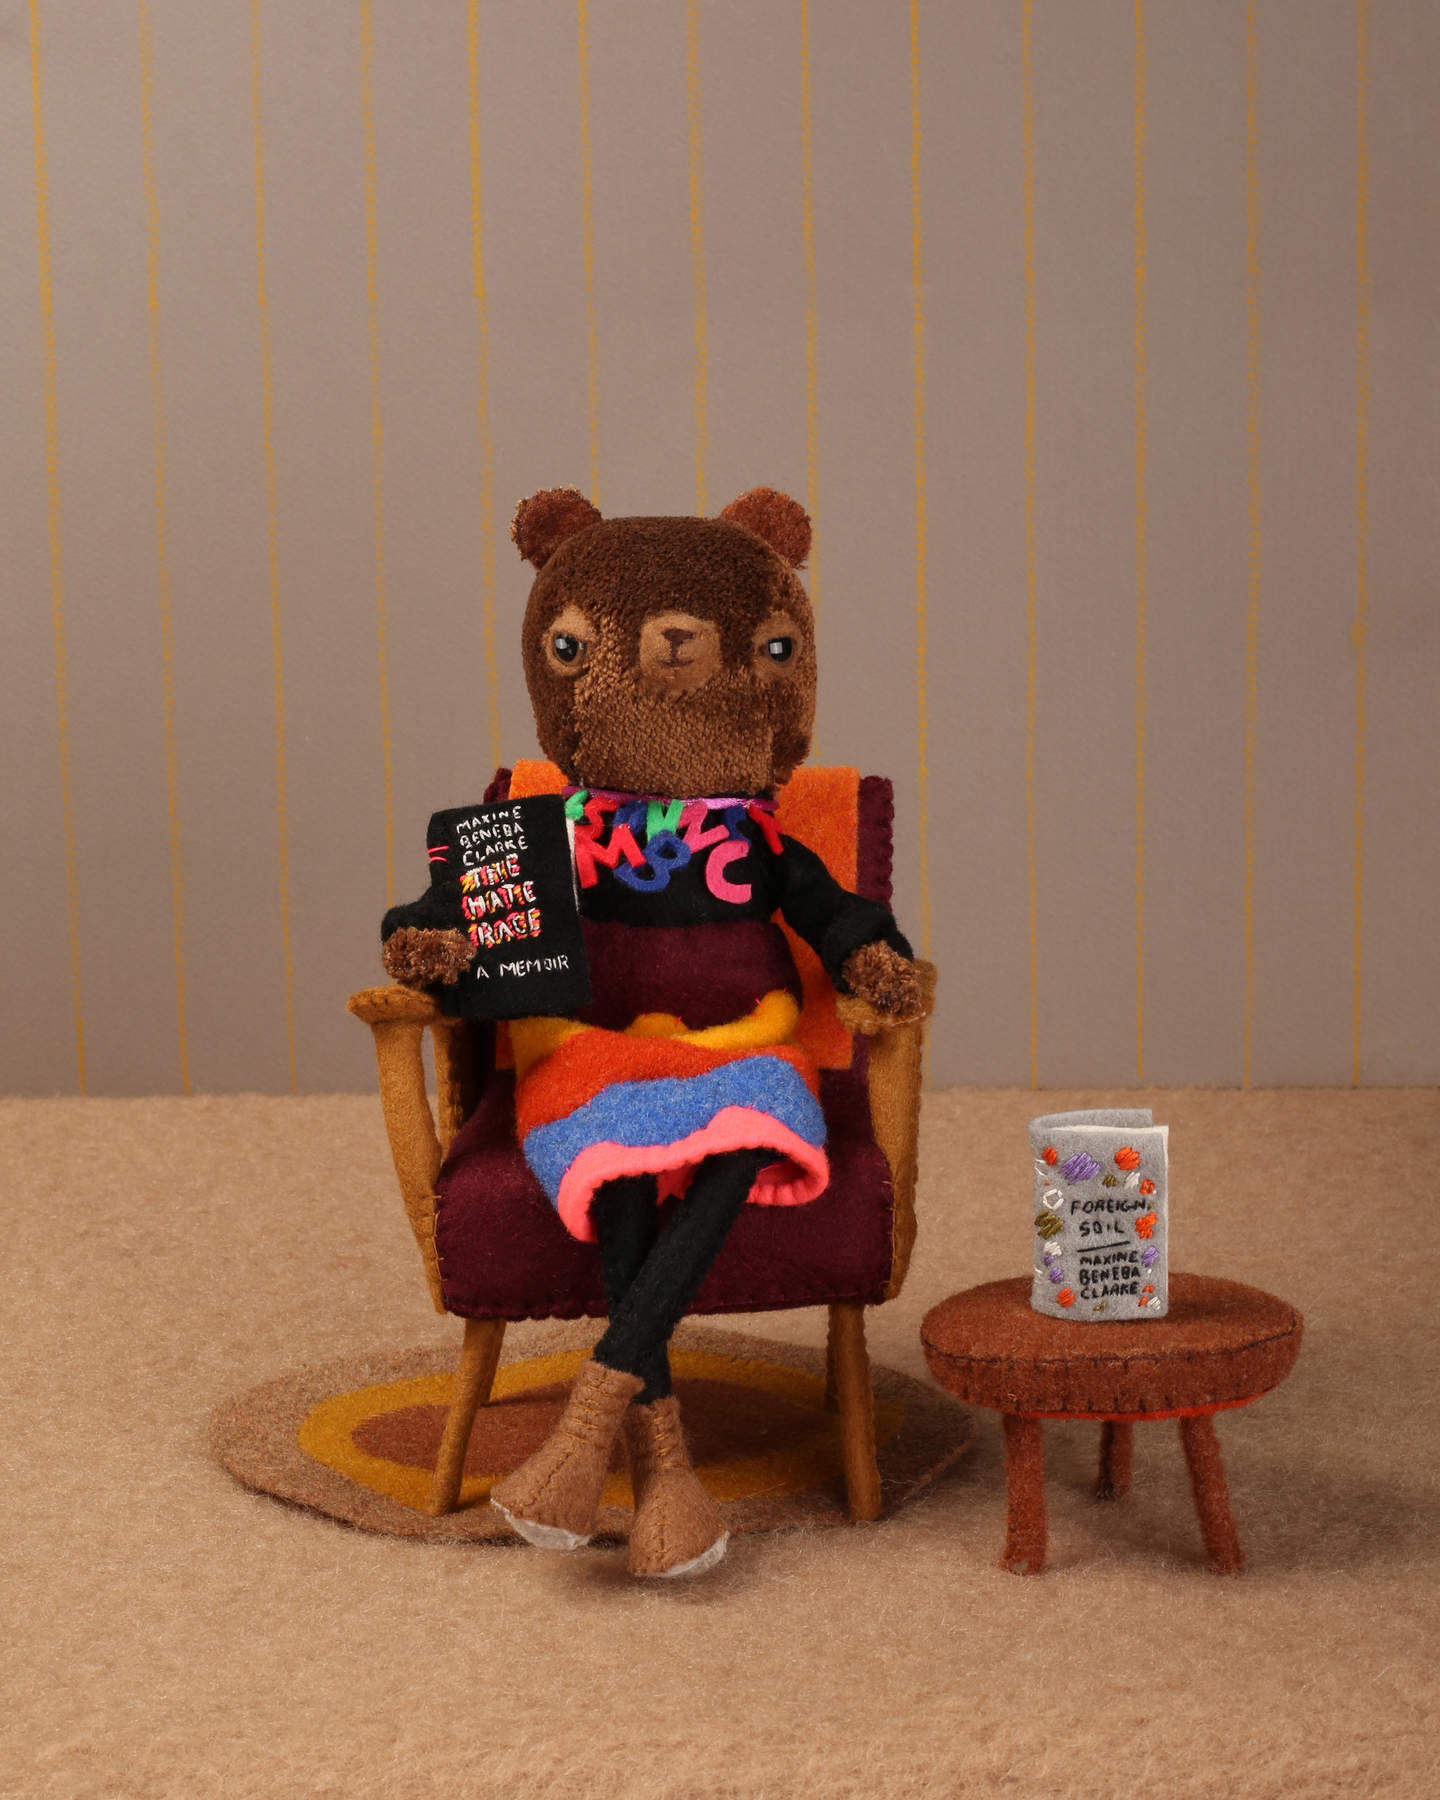 A bear dressed in a colourful dress seated in a lounge chair holding up a book